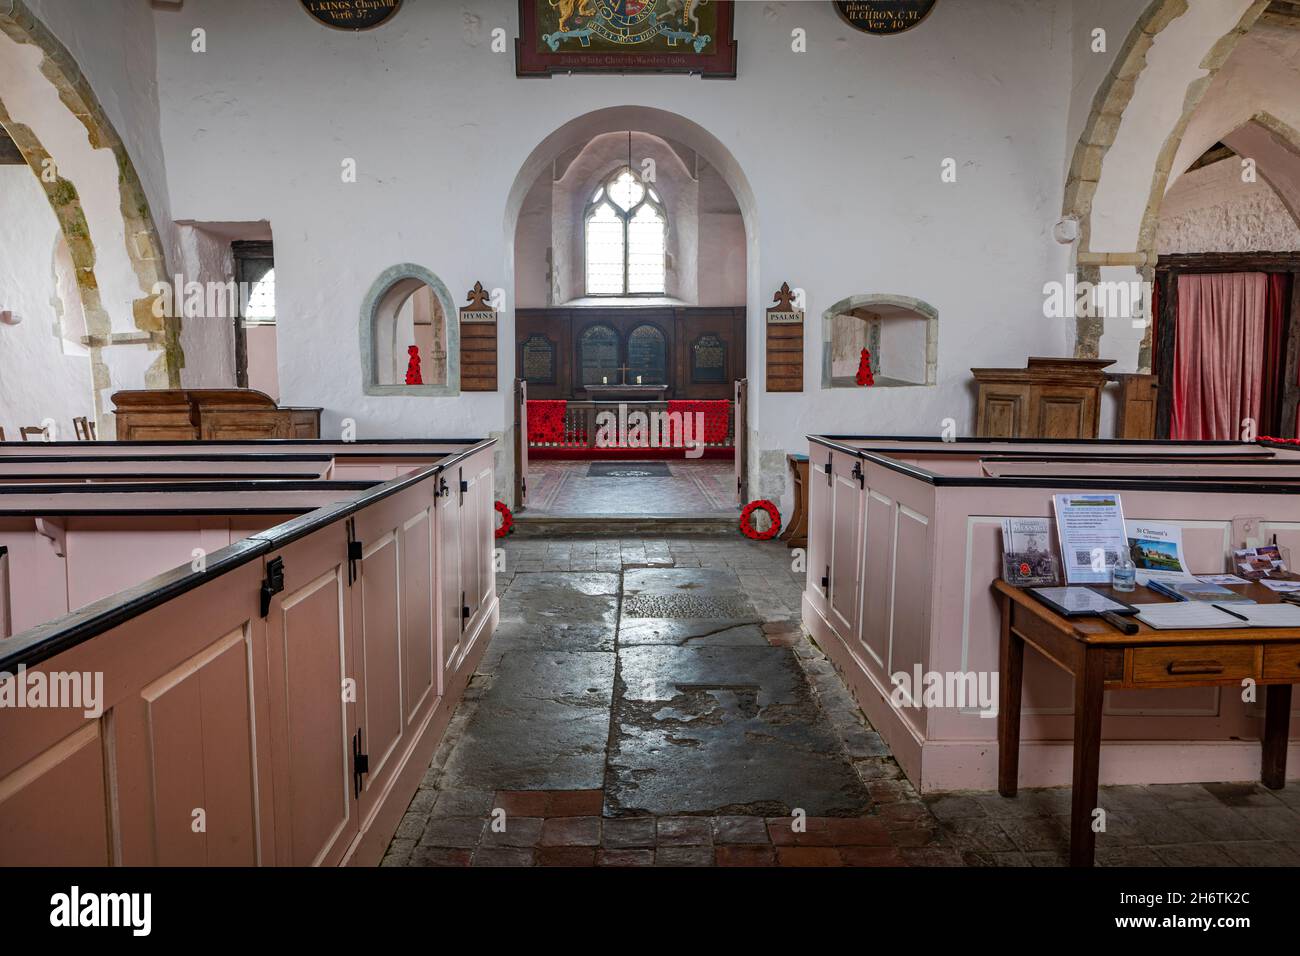 The interior of St Clements Church in Old Romney, Romney Marsh, Kent. Stock Photo